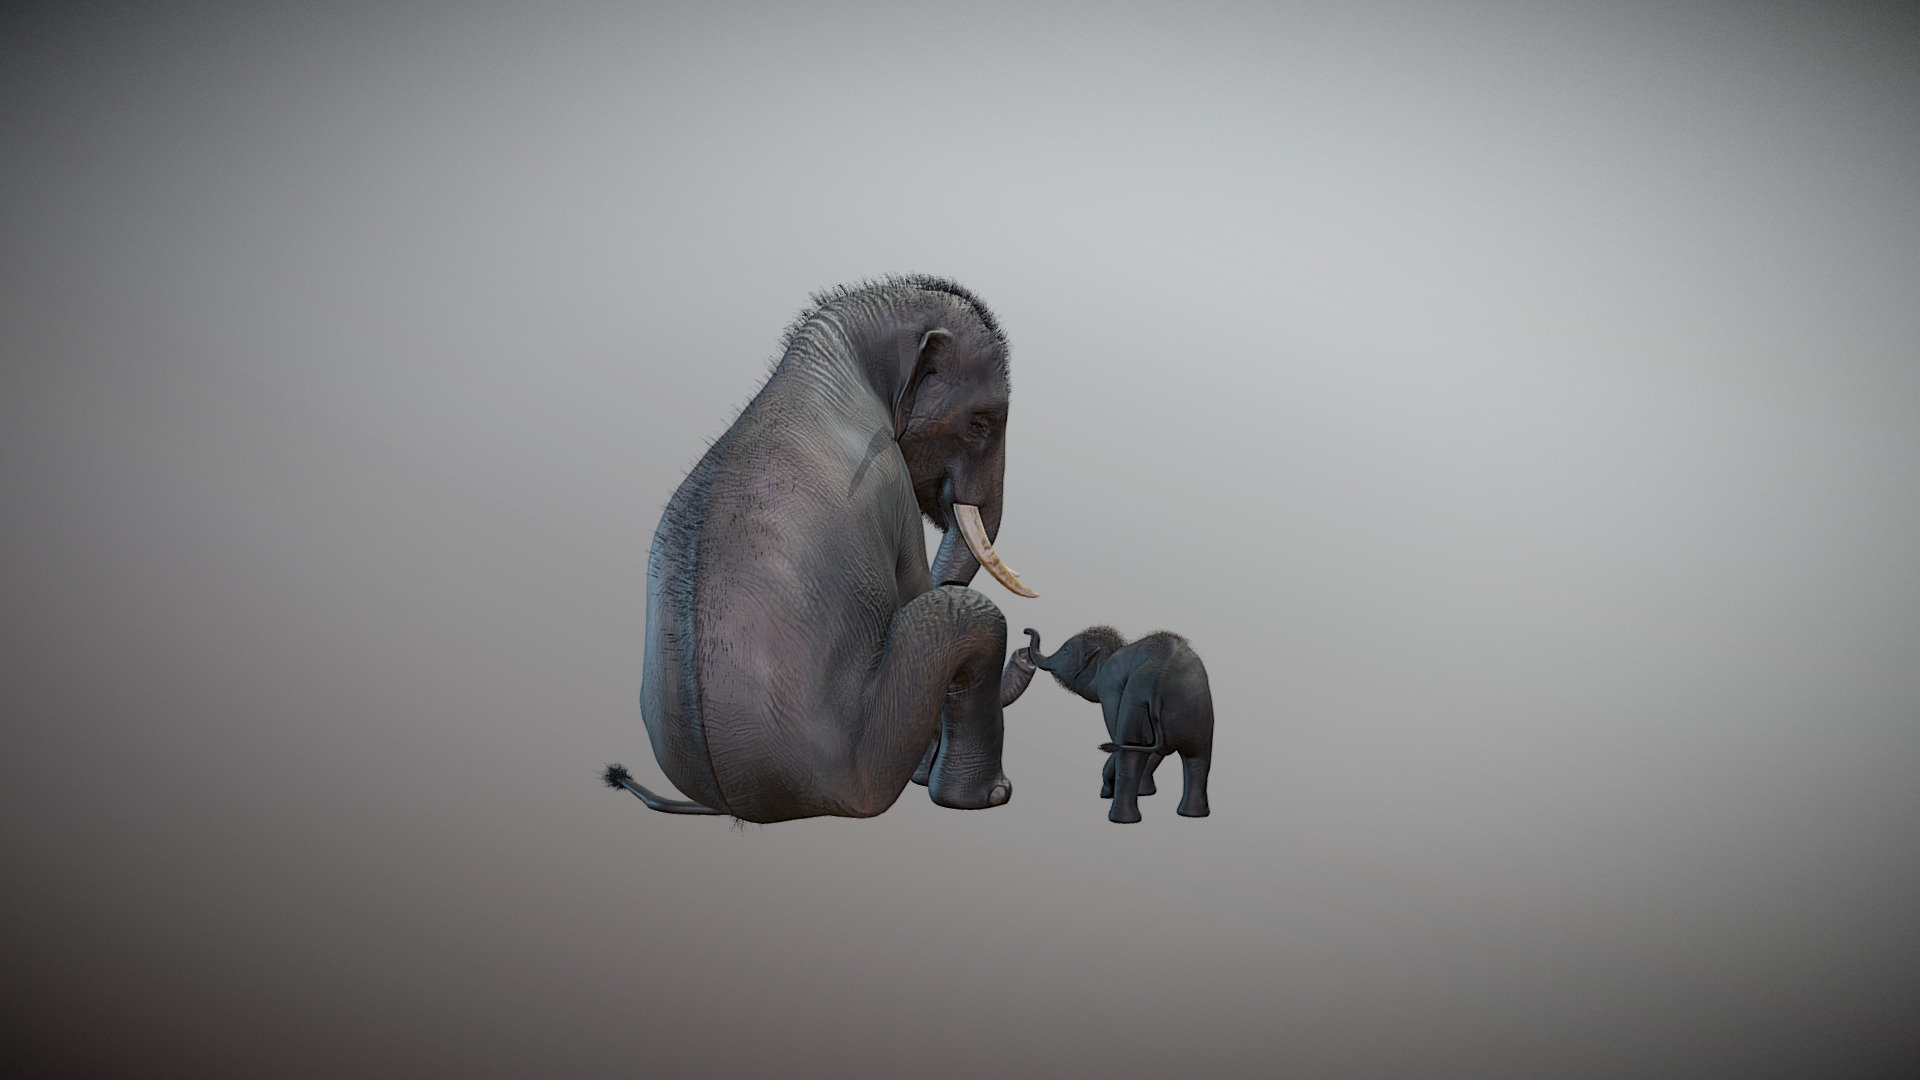 Indian Elephant models I developed in ZBrush and rigged at a later time, for use with DAZ Studio 3d model